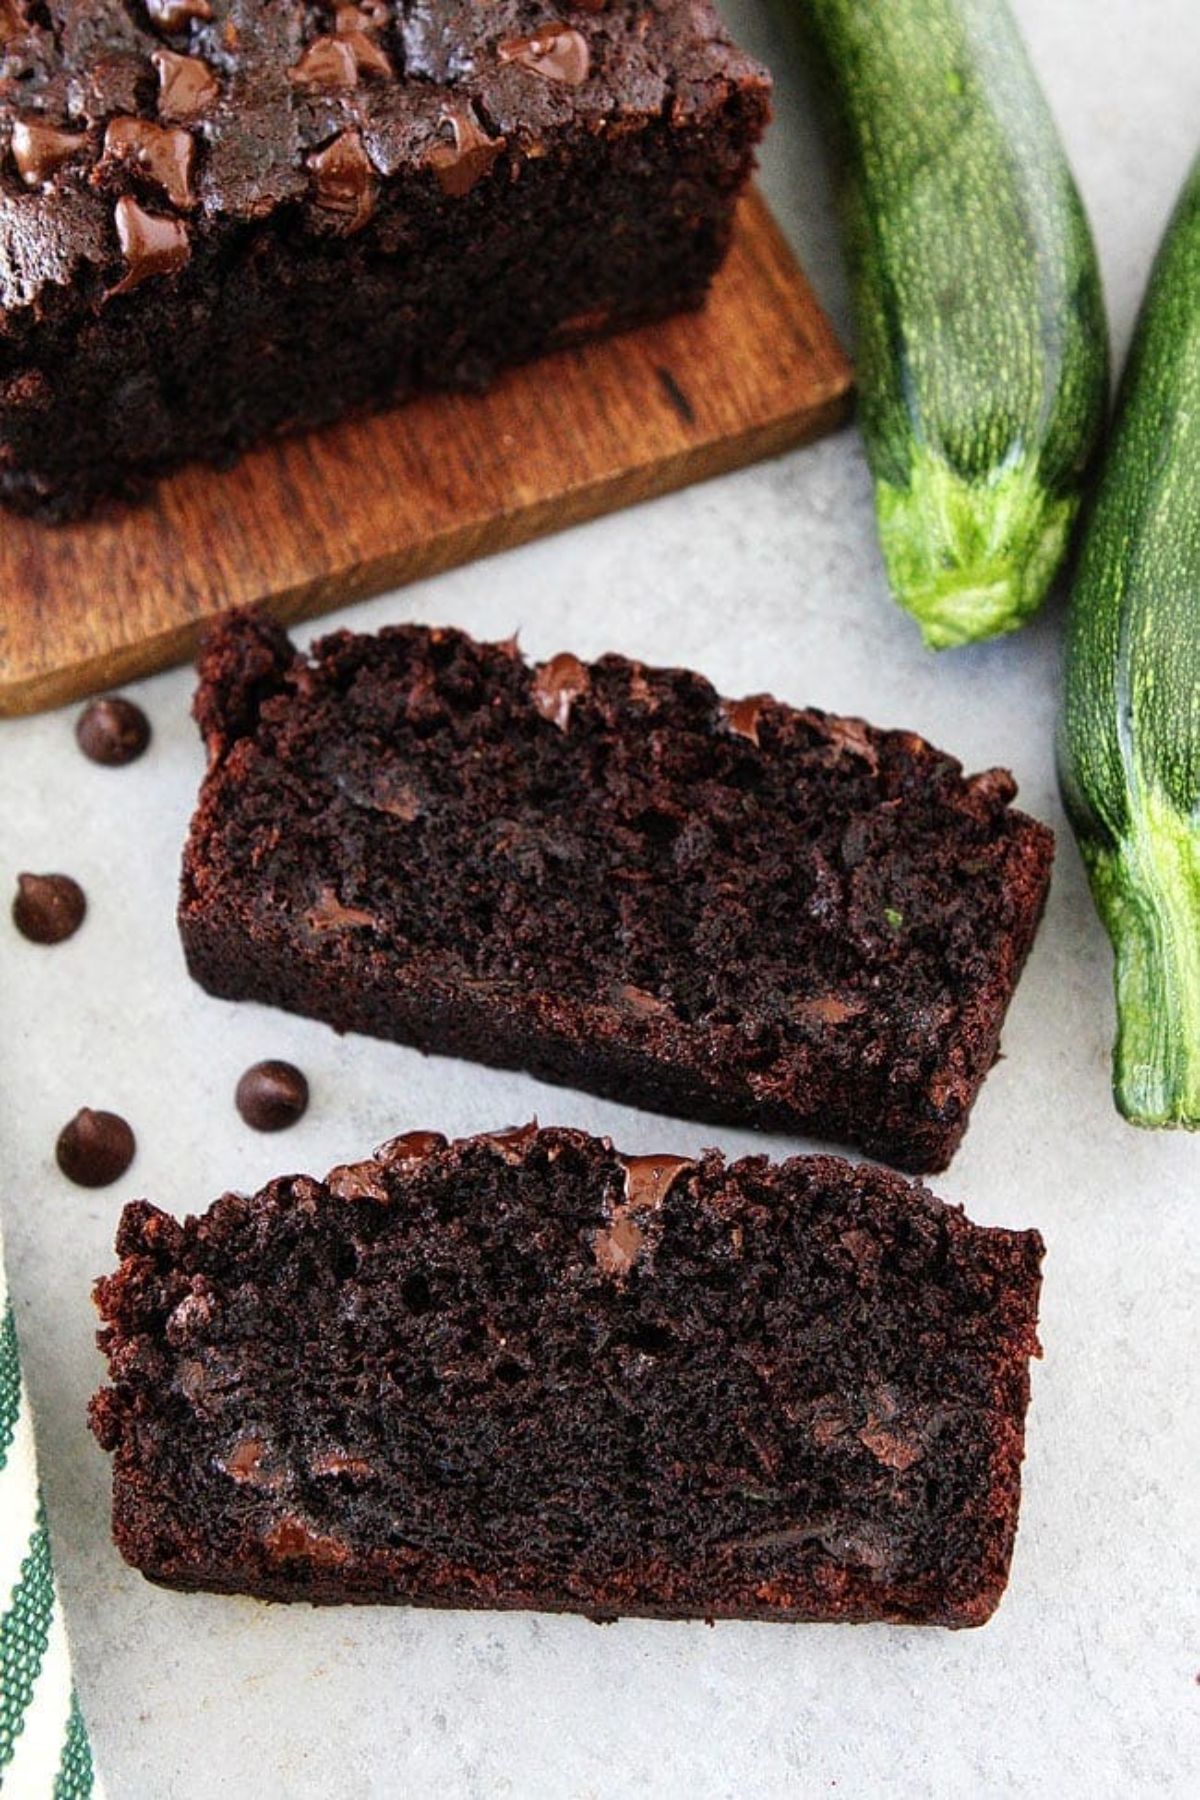 Two slices of Chocolate Zucchini Bread on a table.